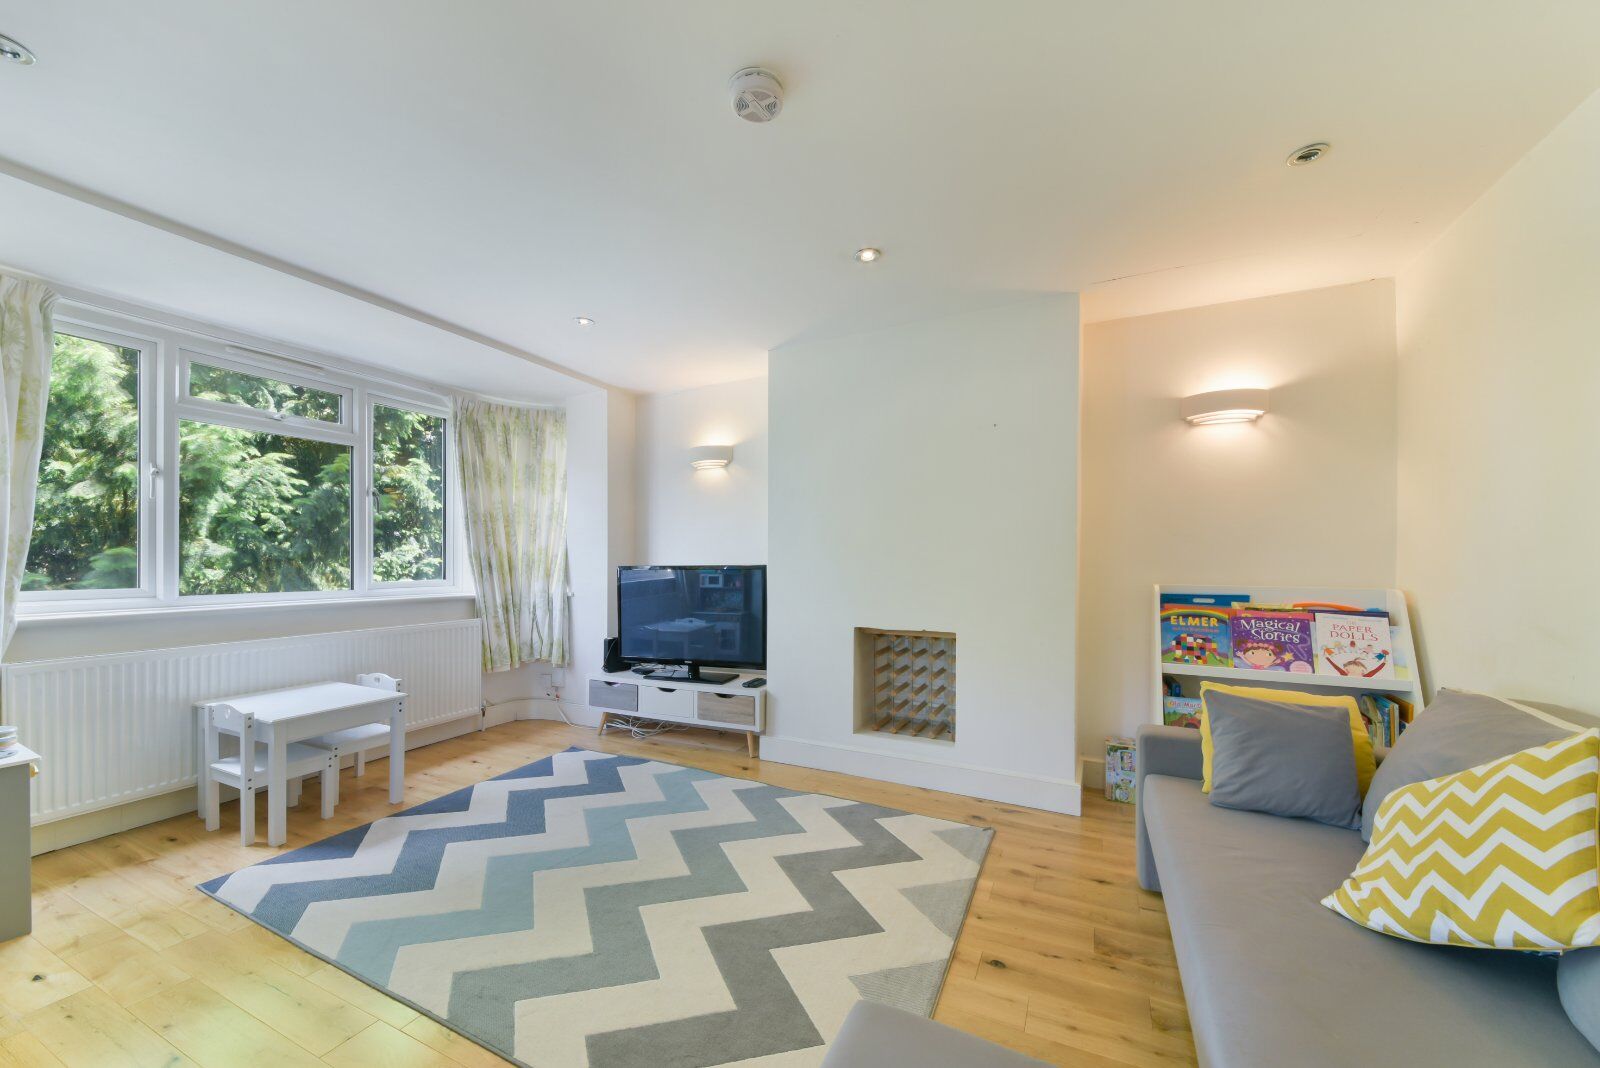 3 bedroom  maisonette to rent, Available from 29/07/2024 Merton Hall Road, London, SW19, main image